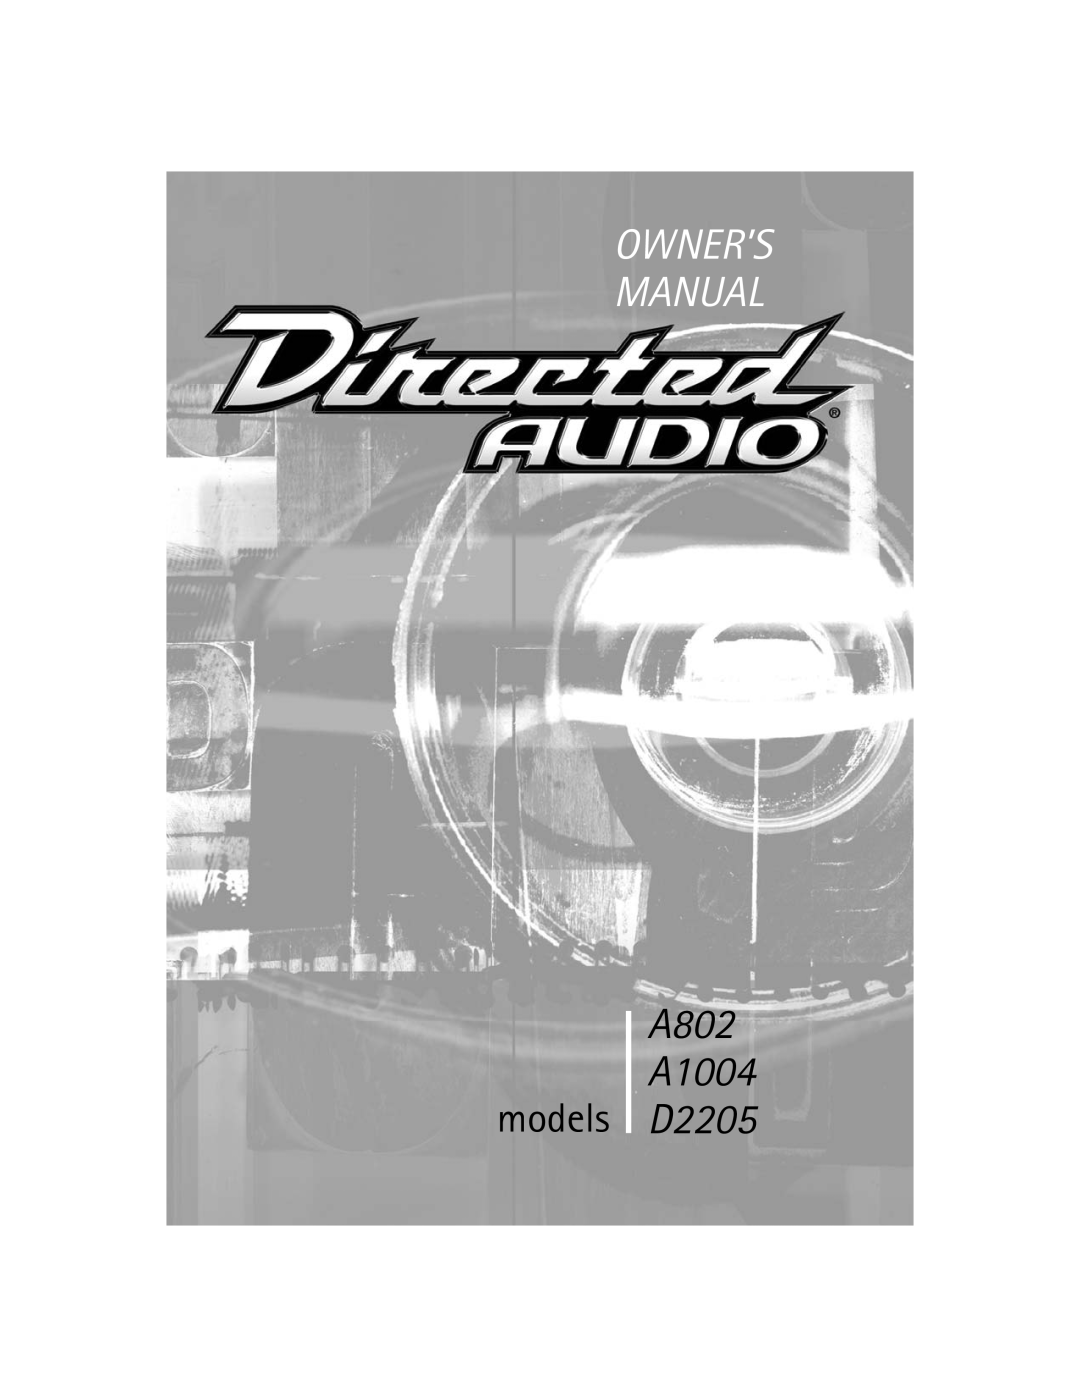 Directed Electronics owner manual A802 A1004 D2205, models, Owner’S Manual 